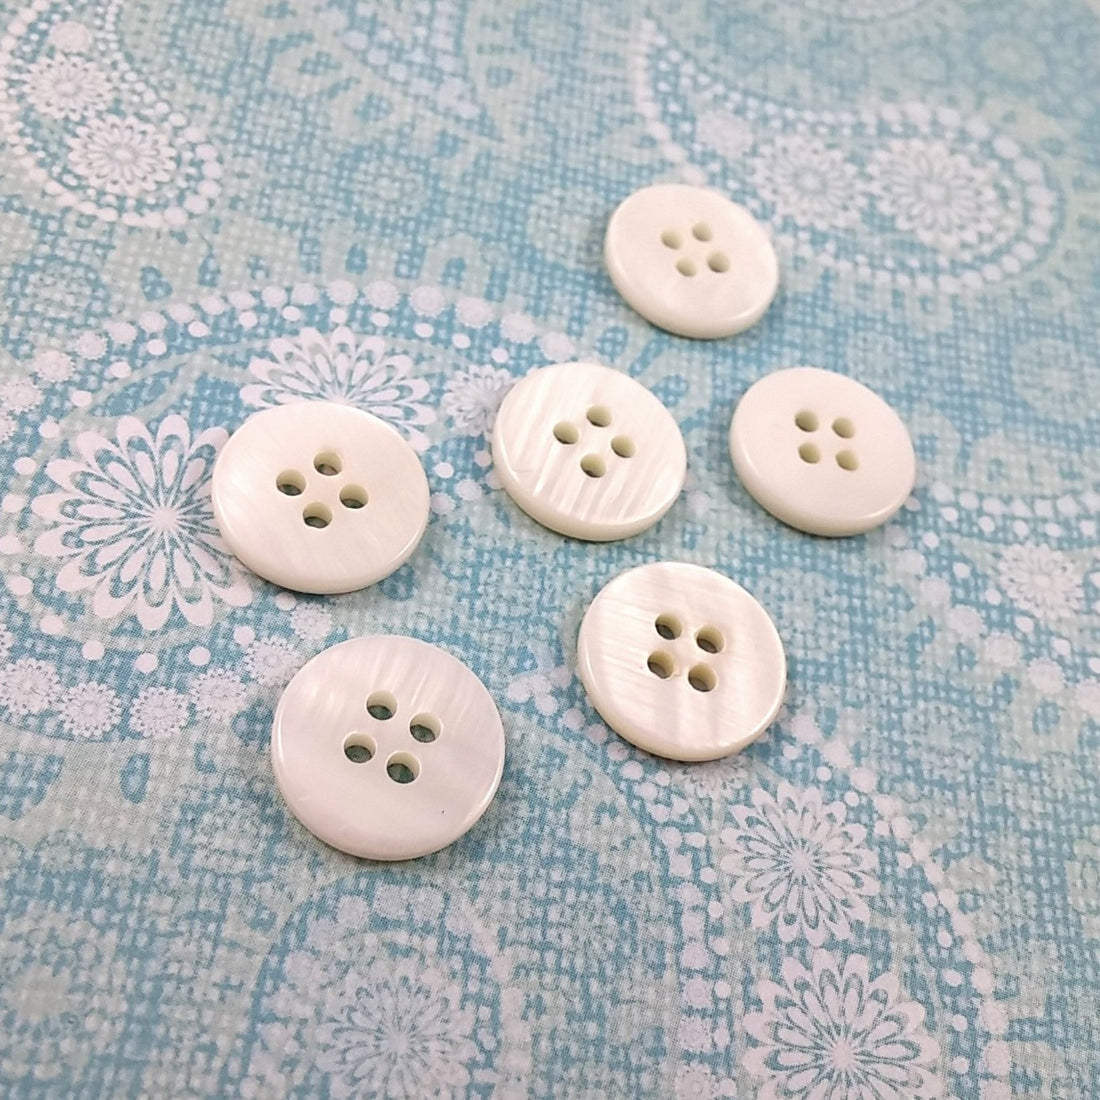 Mother of Pearl Shell Buttons 0.5 inch - set of 6 eco friendly natural buttons